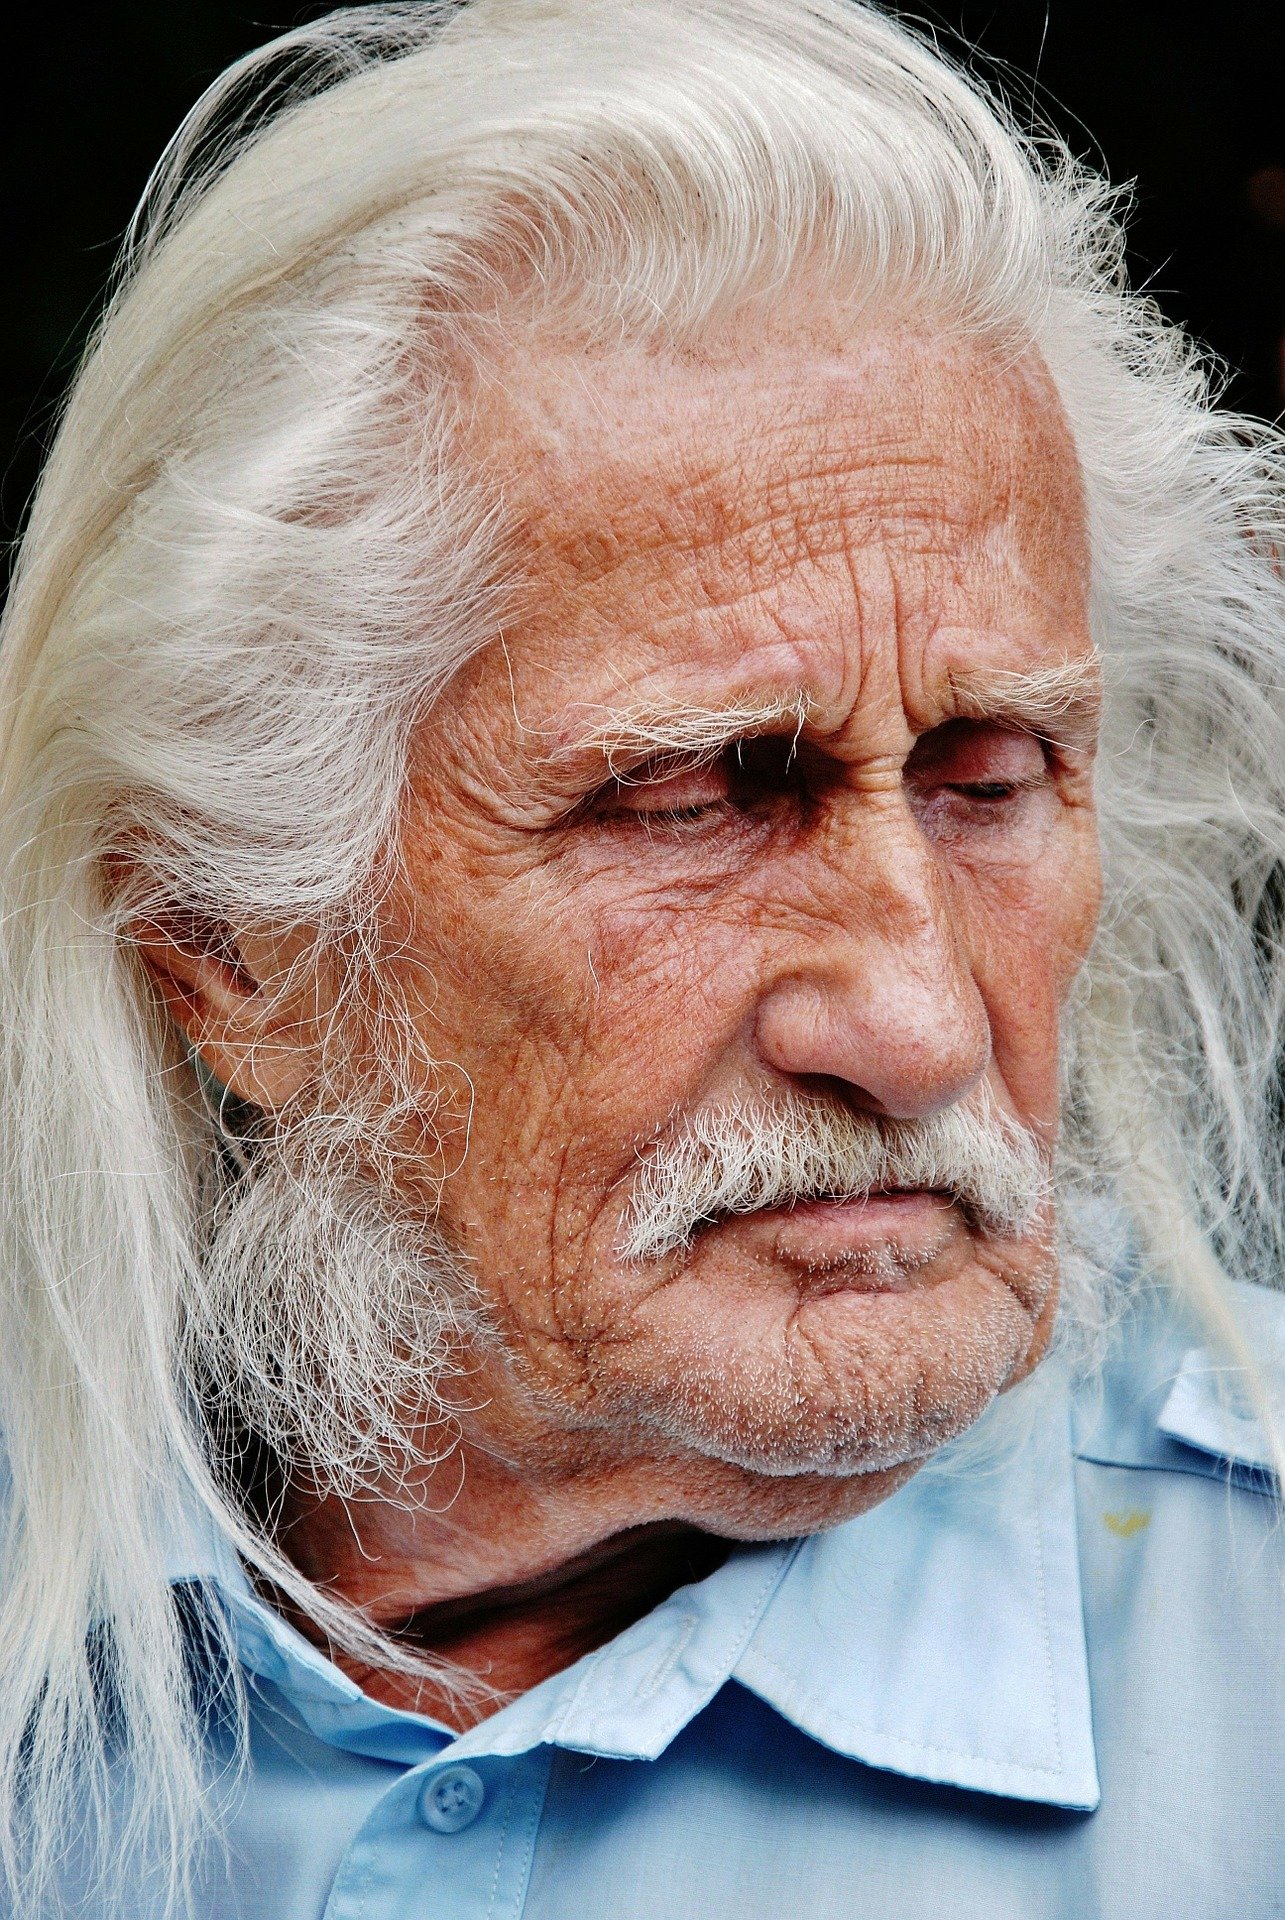 An old man with a sad expression on his face | Photo: Pixabay